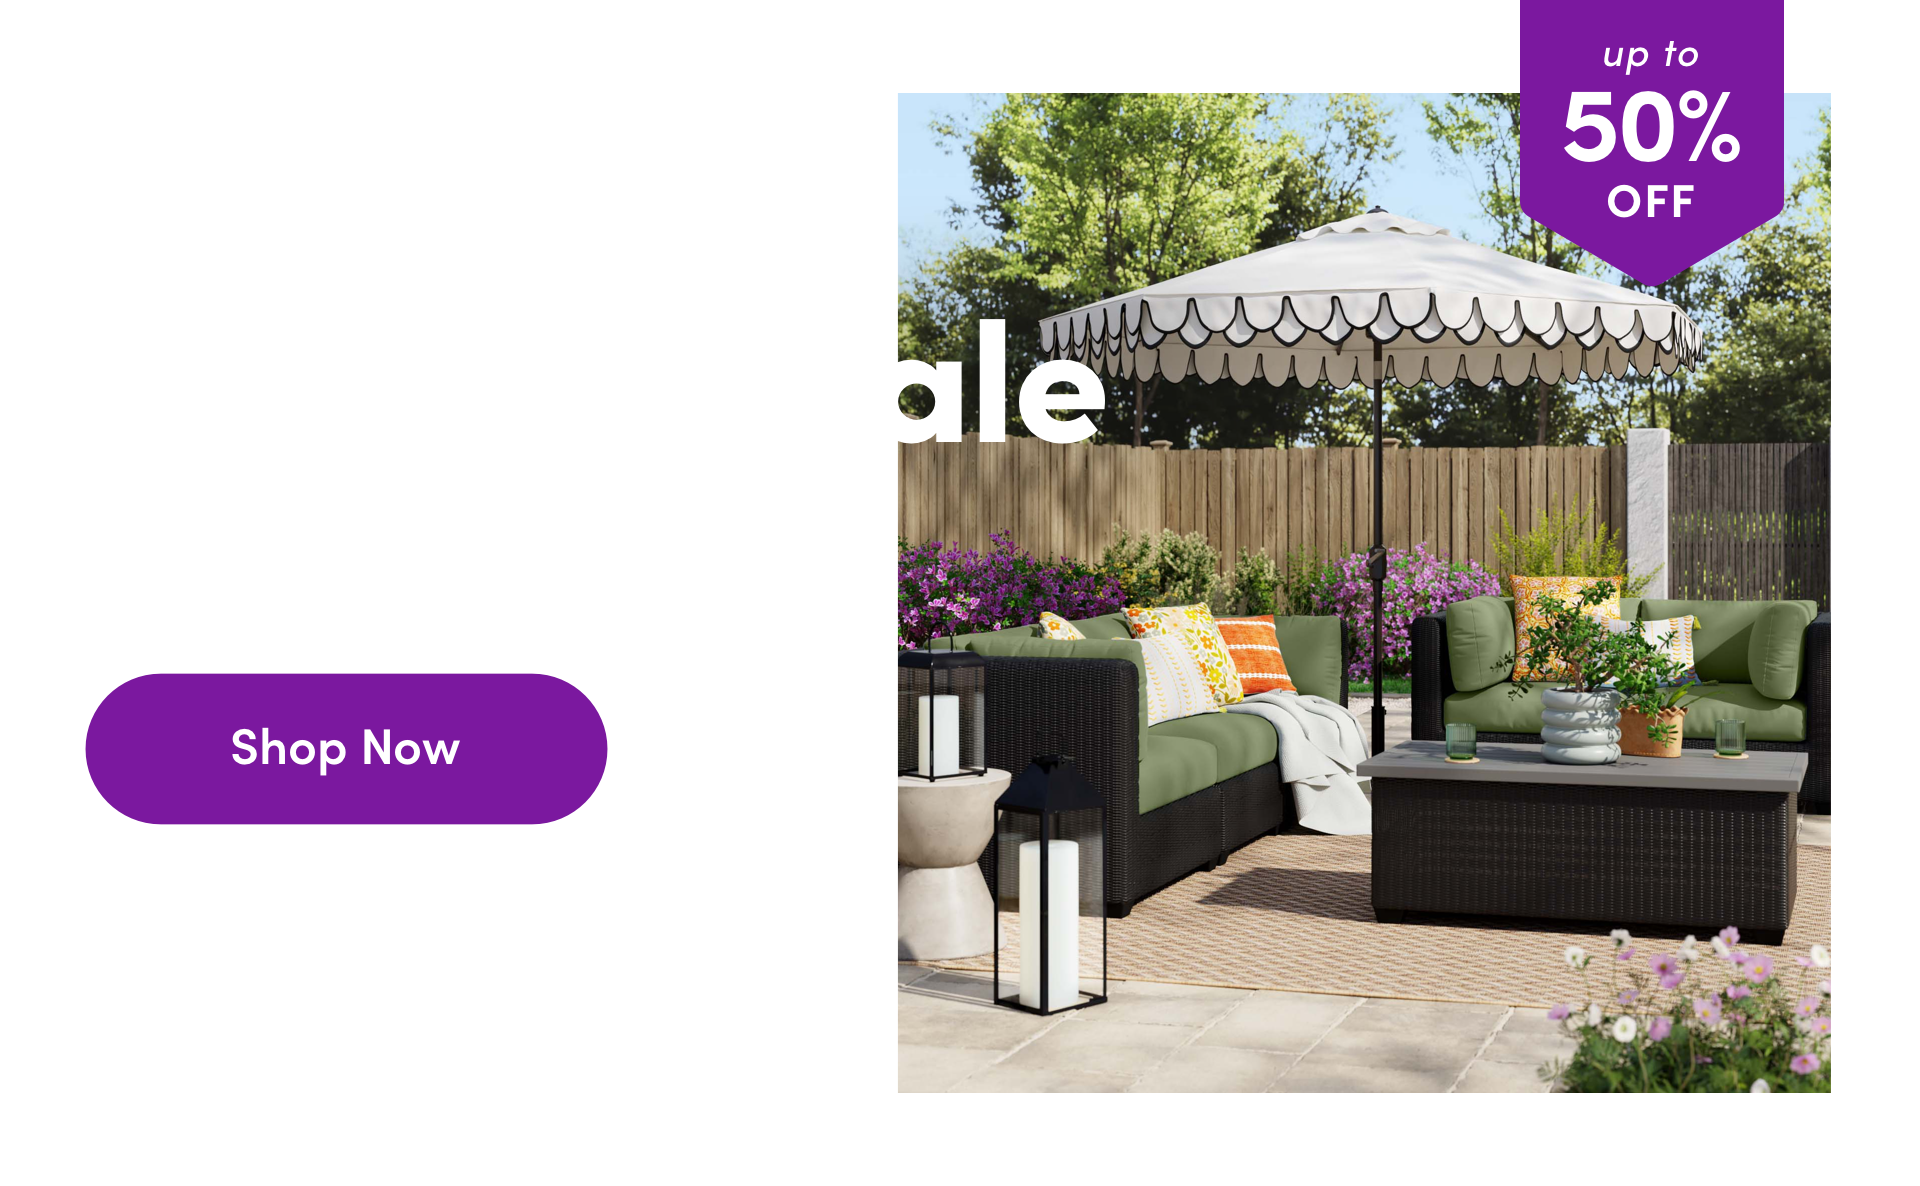 The BIG Outdoor Sale. Deals so good, they'll be the talk of the neighborhood. Shop Now.